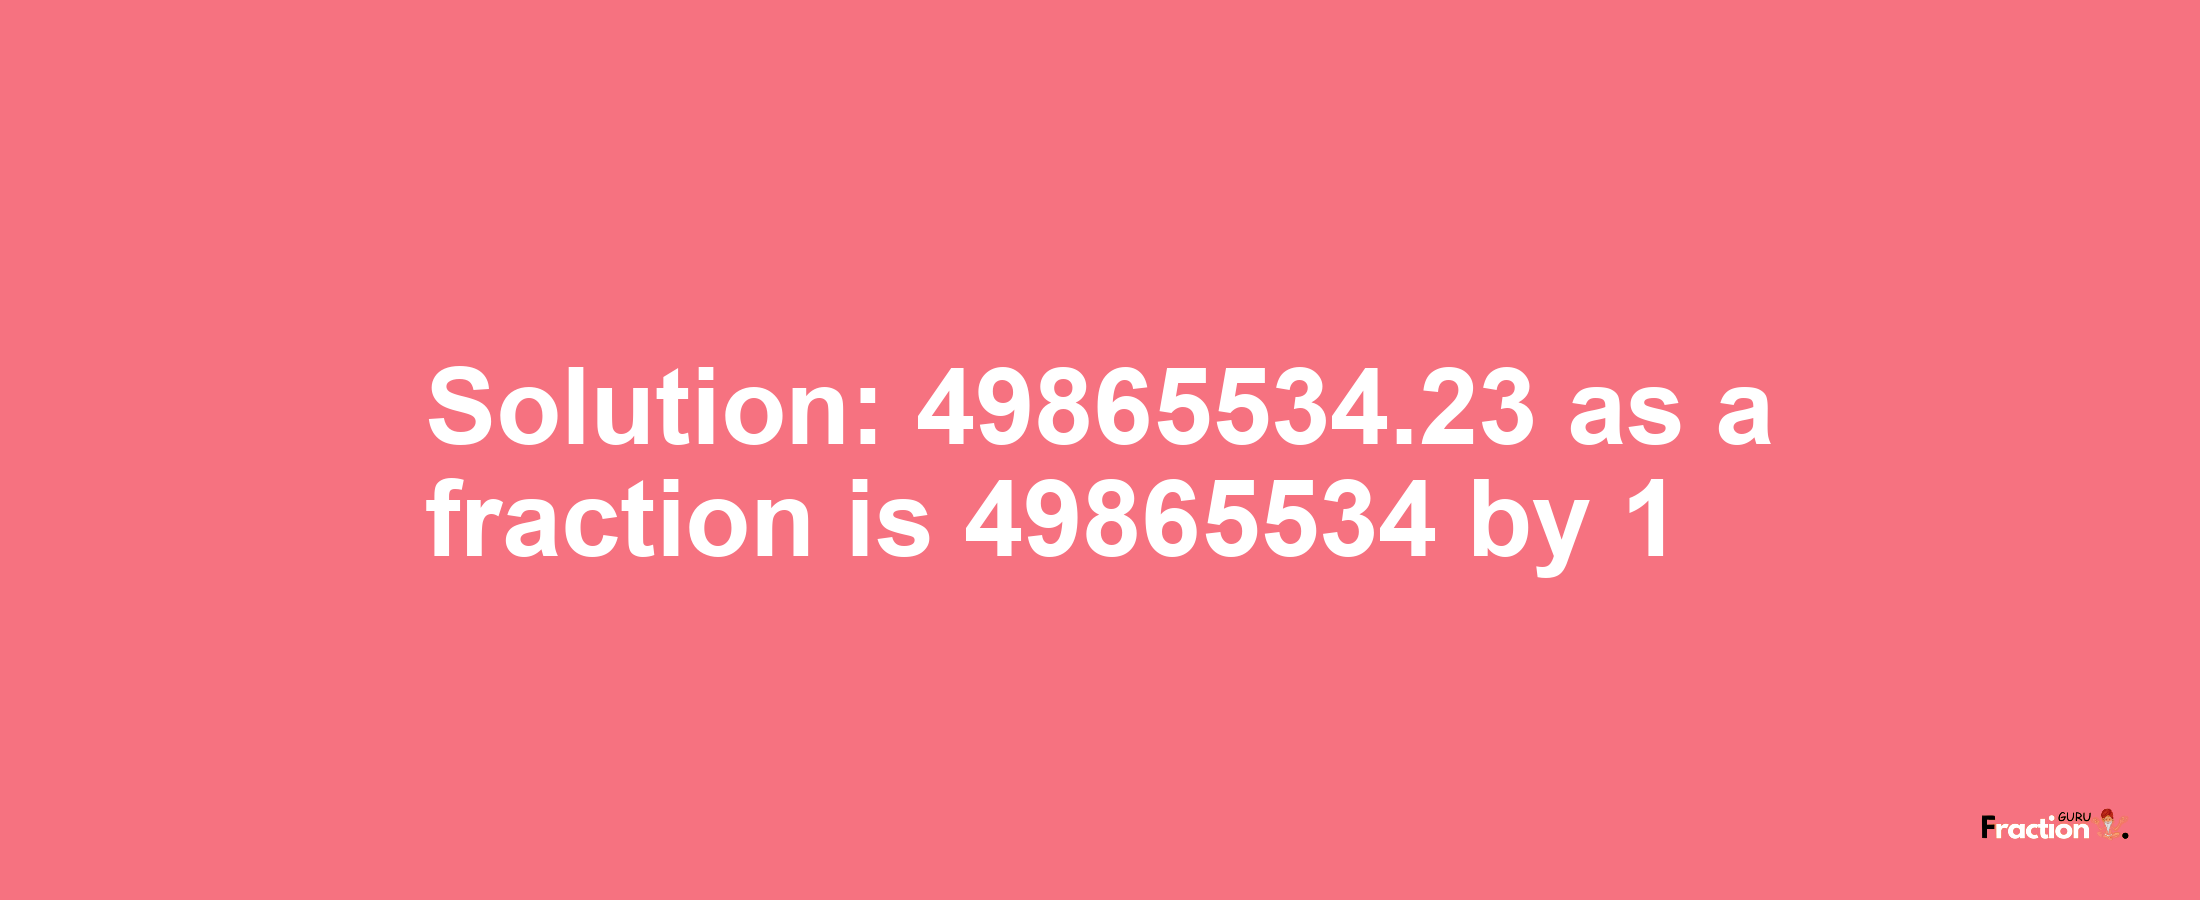 Solution:49865534.23 as a fraction is 49865534/1